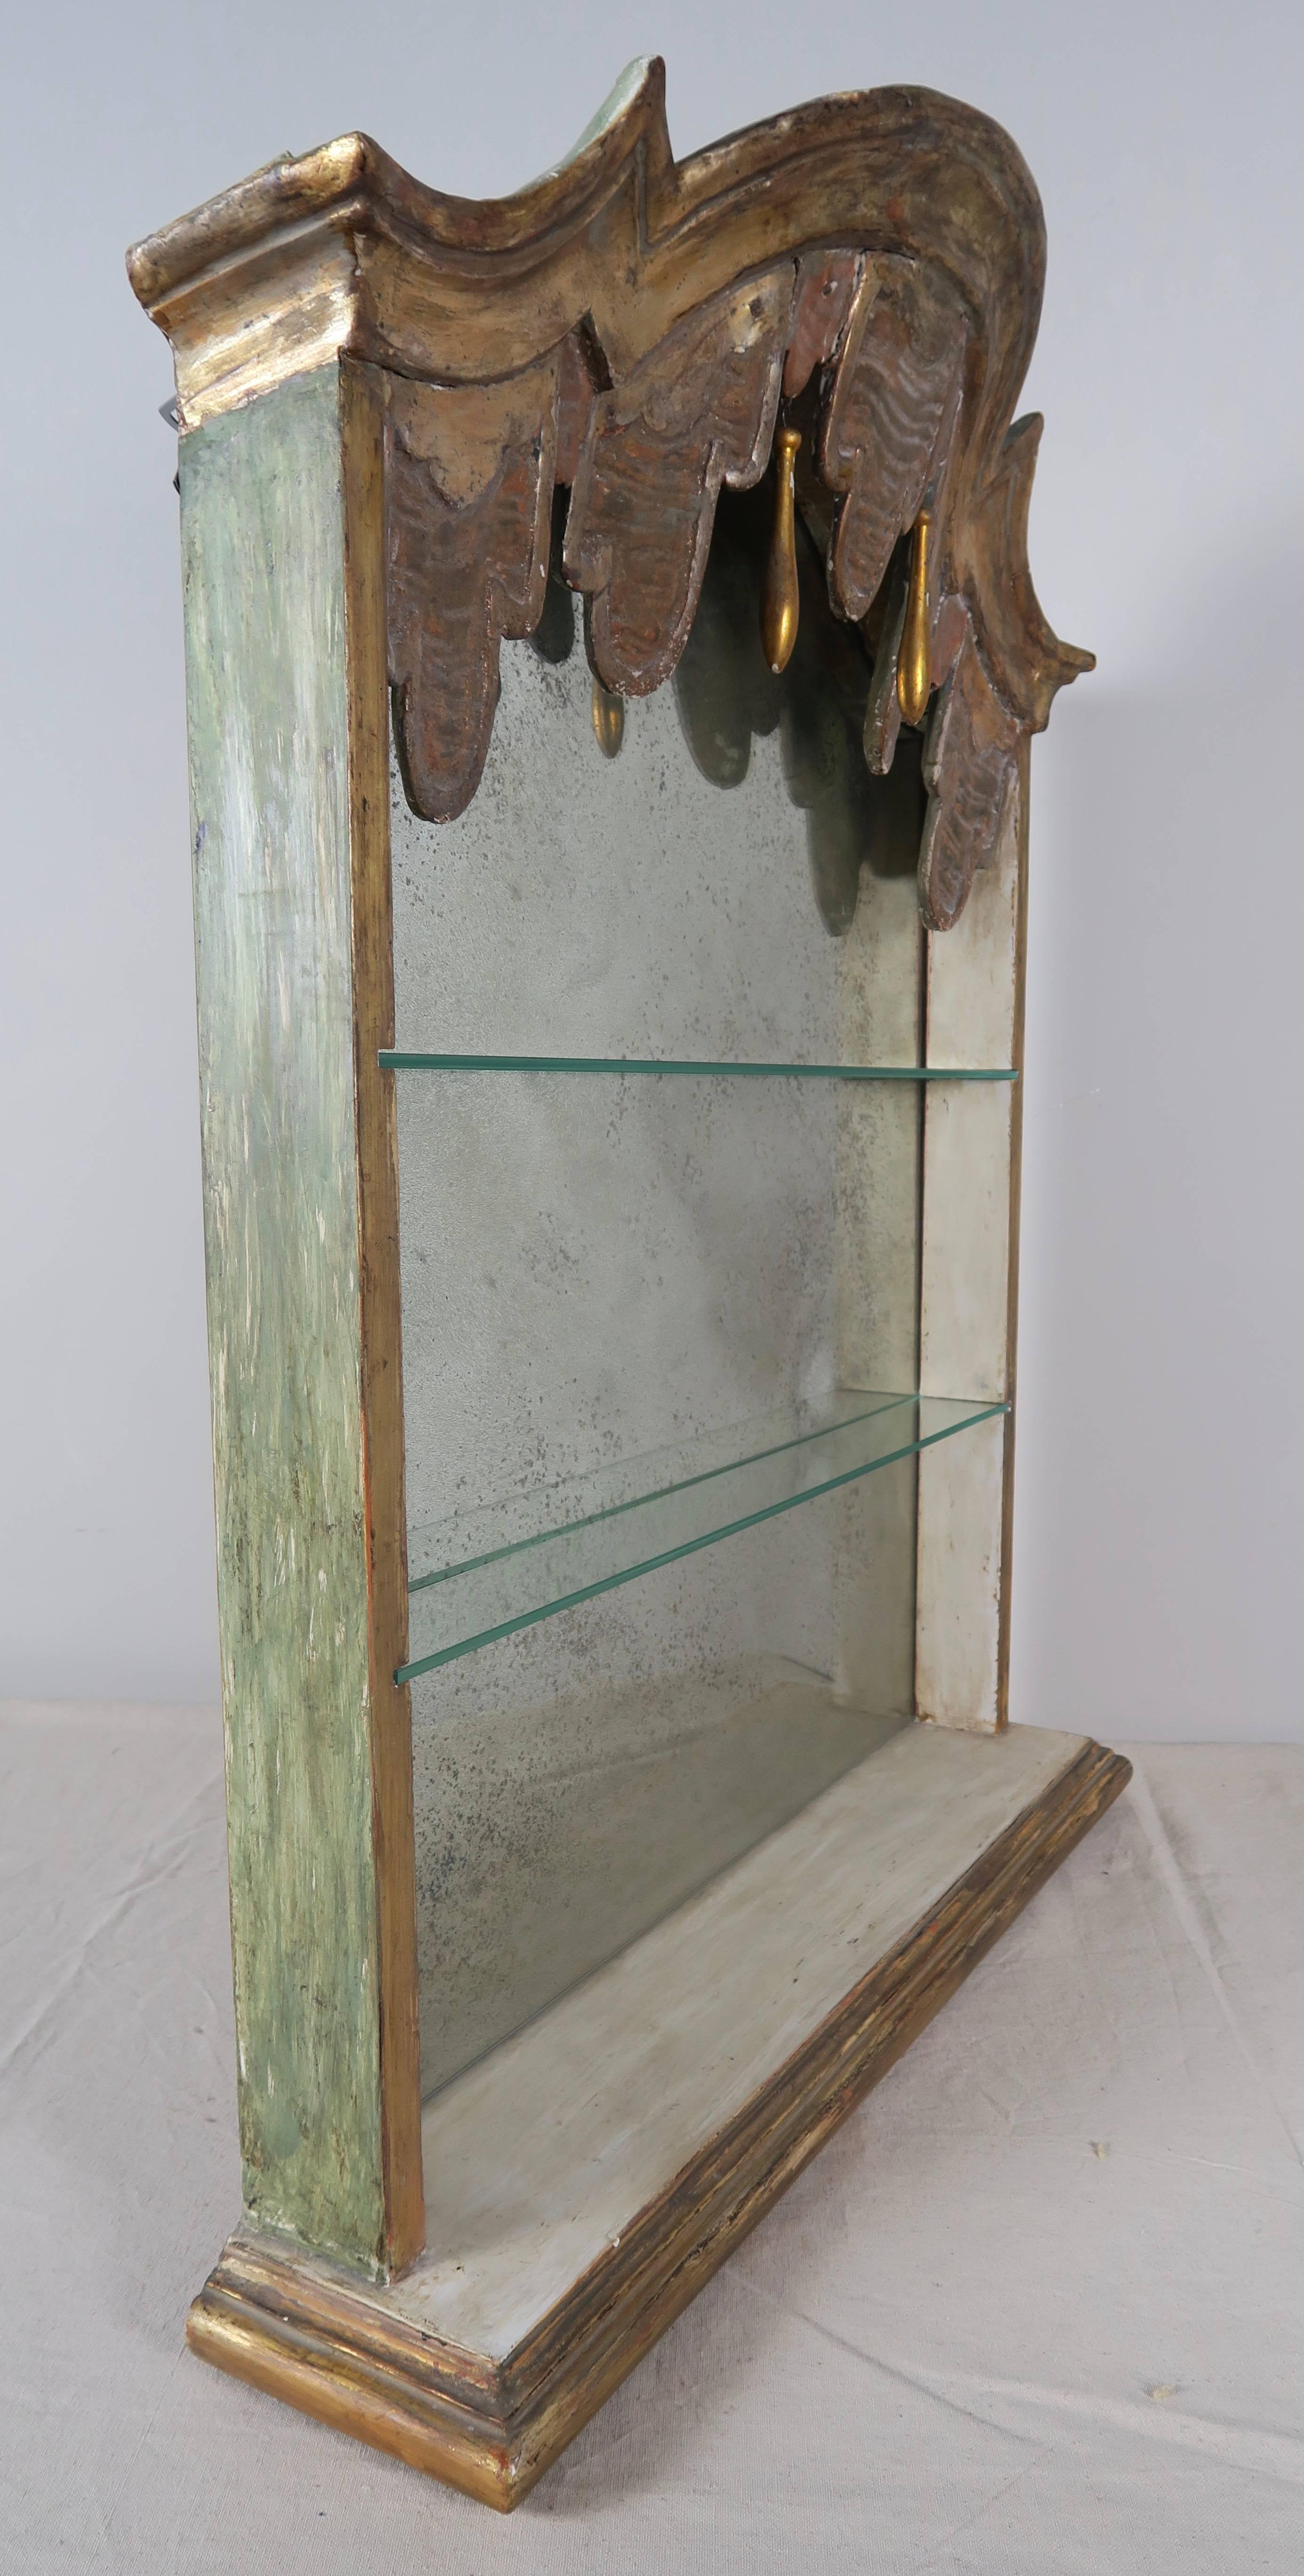 Antique mirrored Italian petite wall cabinet made from antique elements.